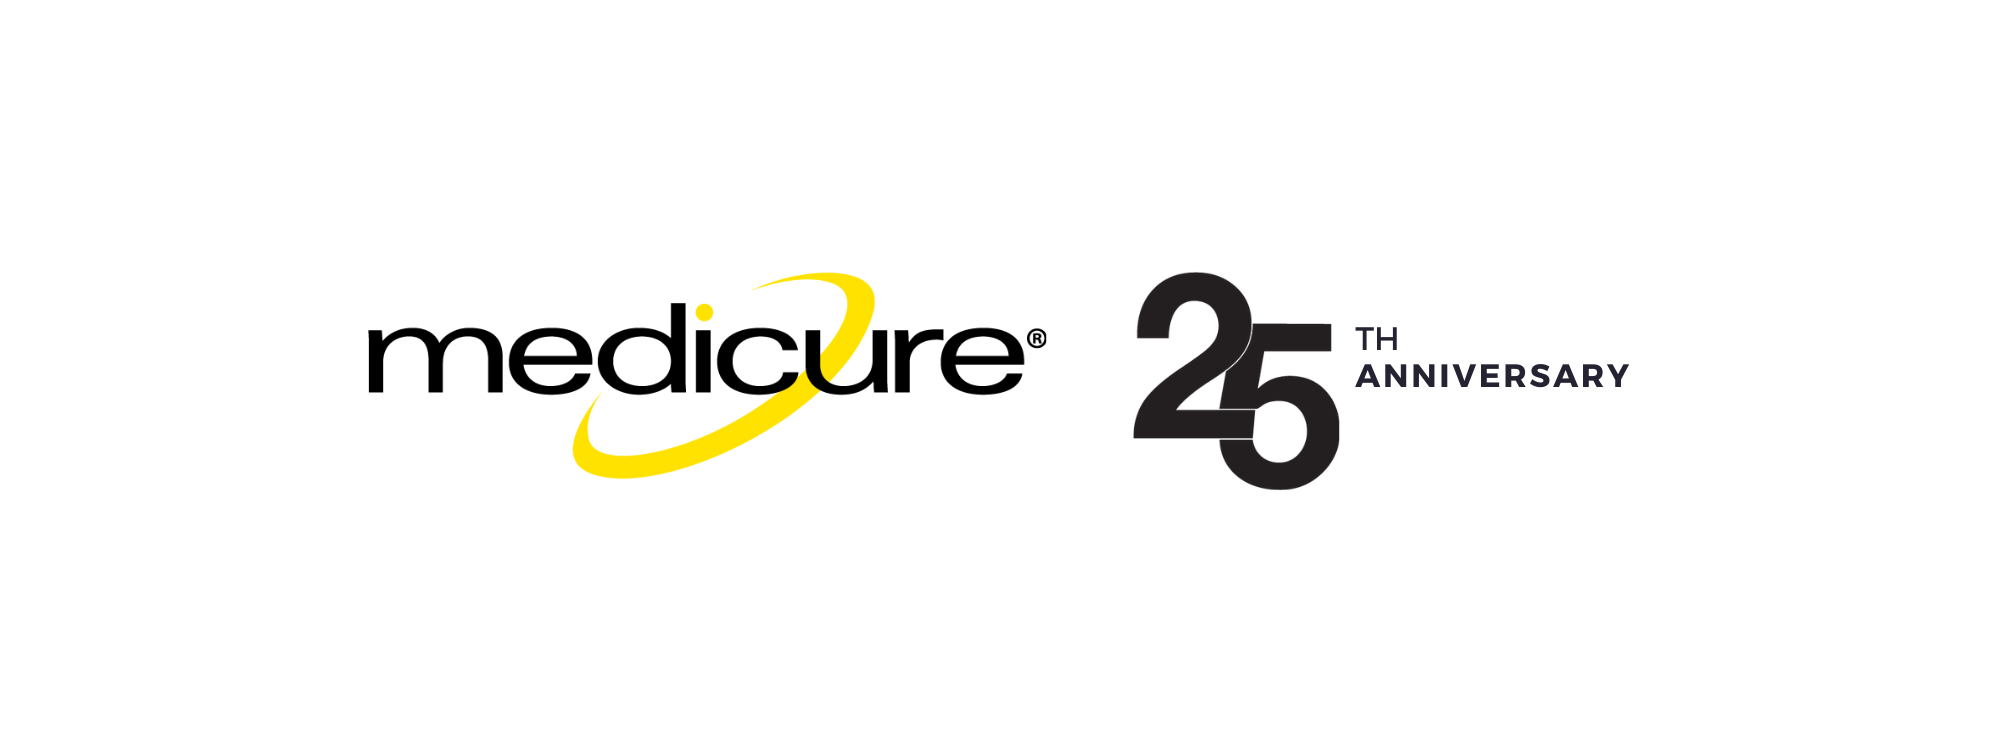 Medicure Marks 25th Anniversary